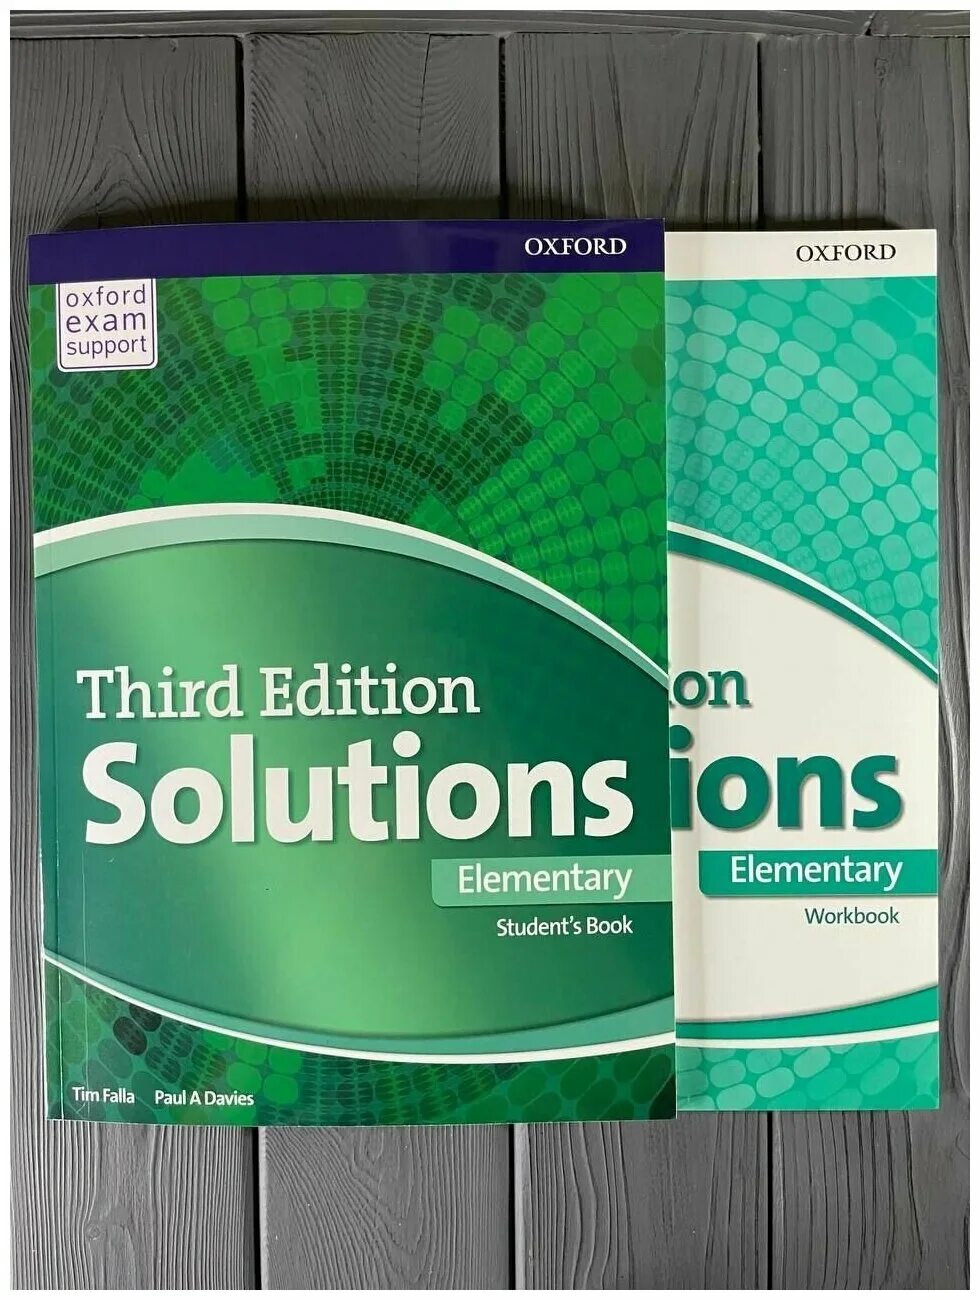 Solutions elementary 6 класс. Solutions Elementary 3rd Edition. Учебник solutions Elementary 3 Edition. Third Edition solutions Elementary. Oxford solutions Elementary.